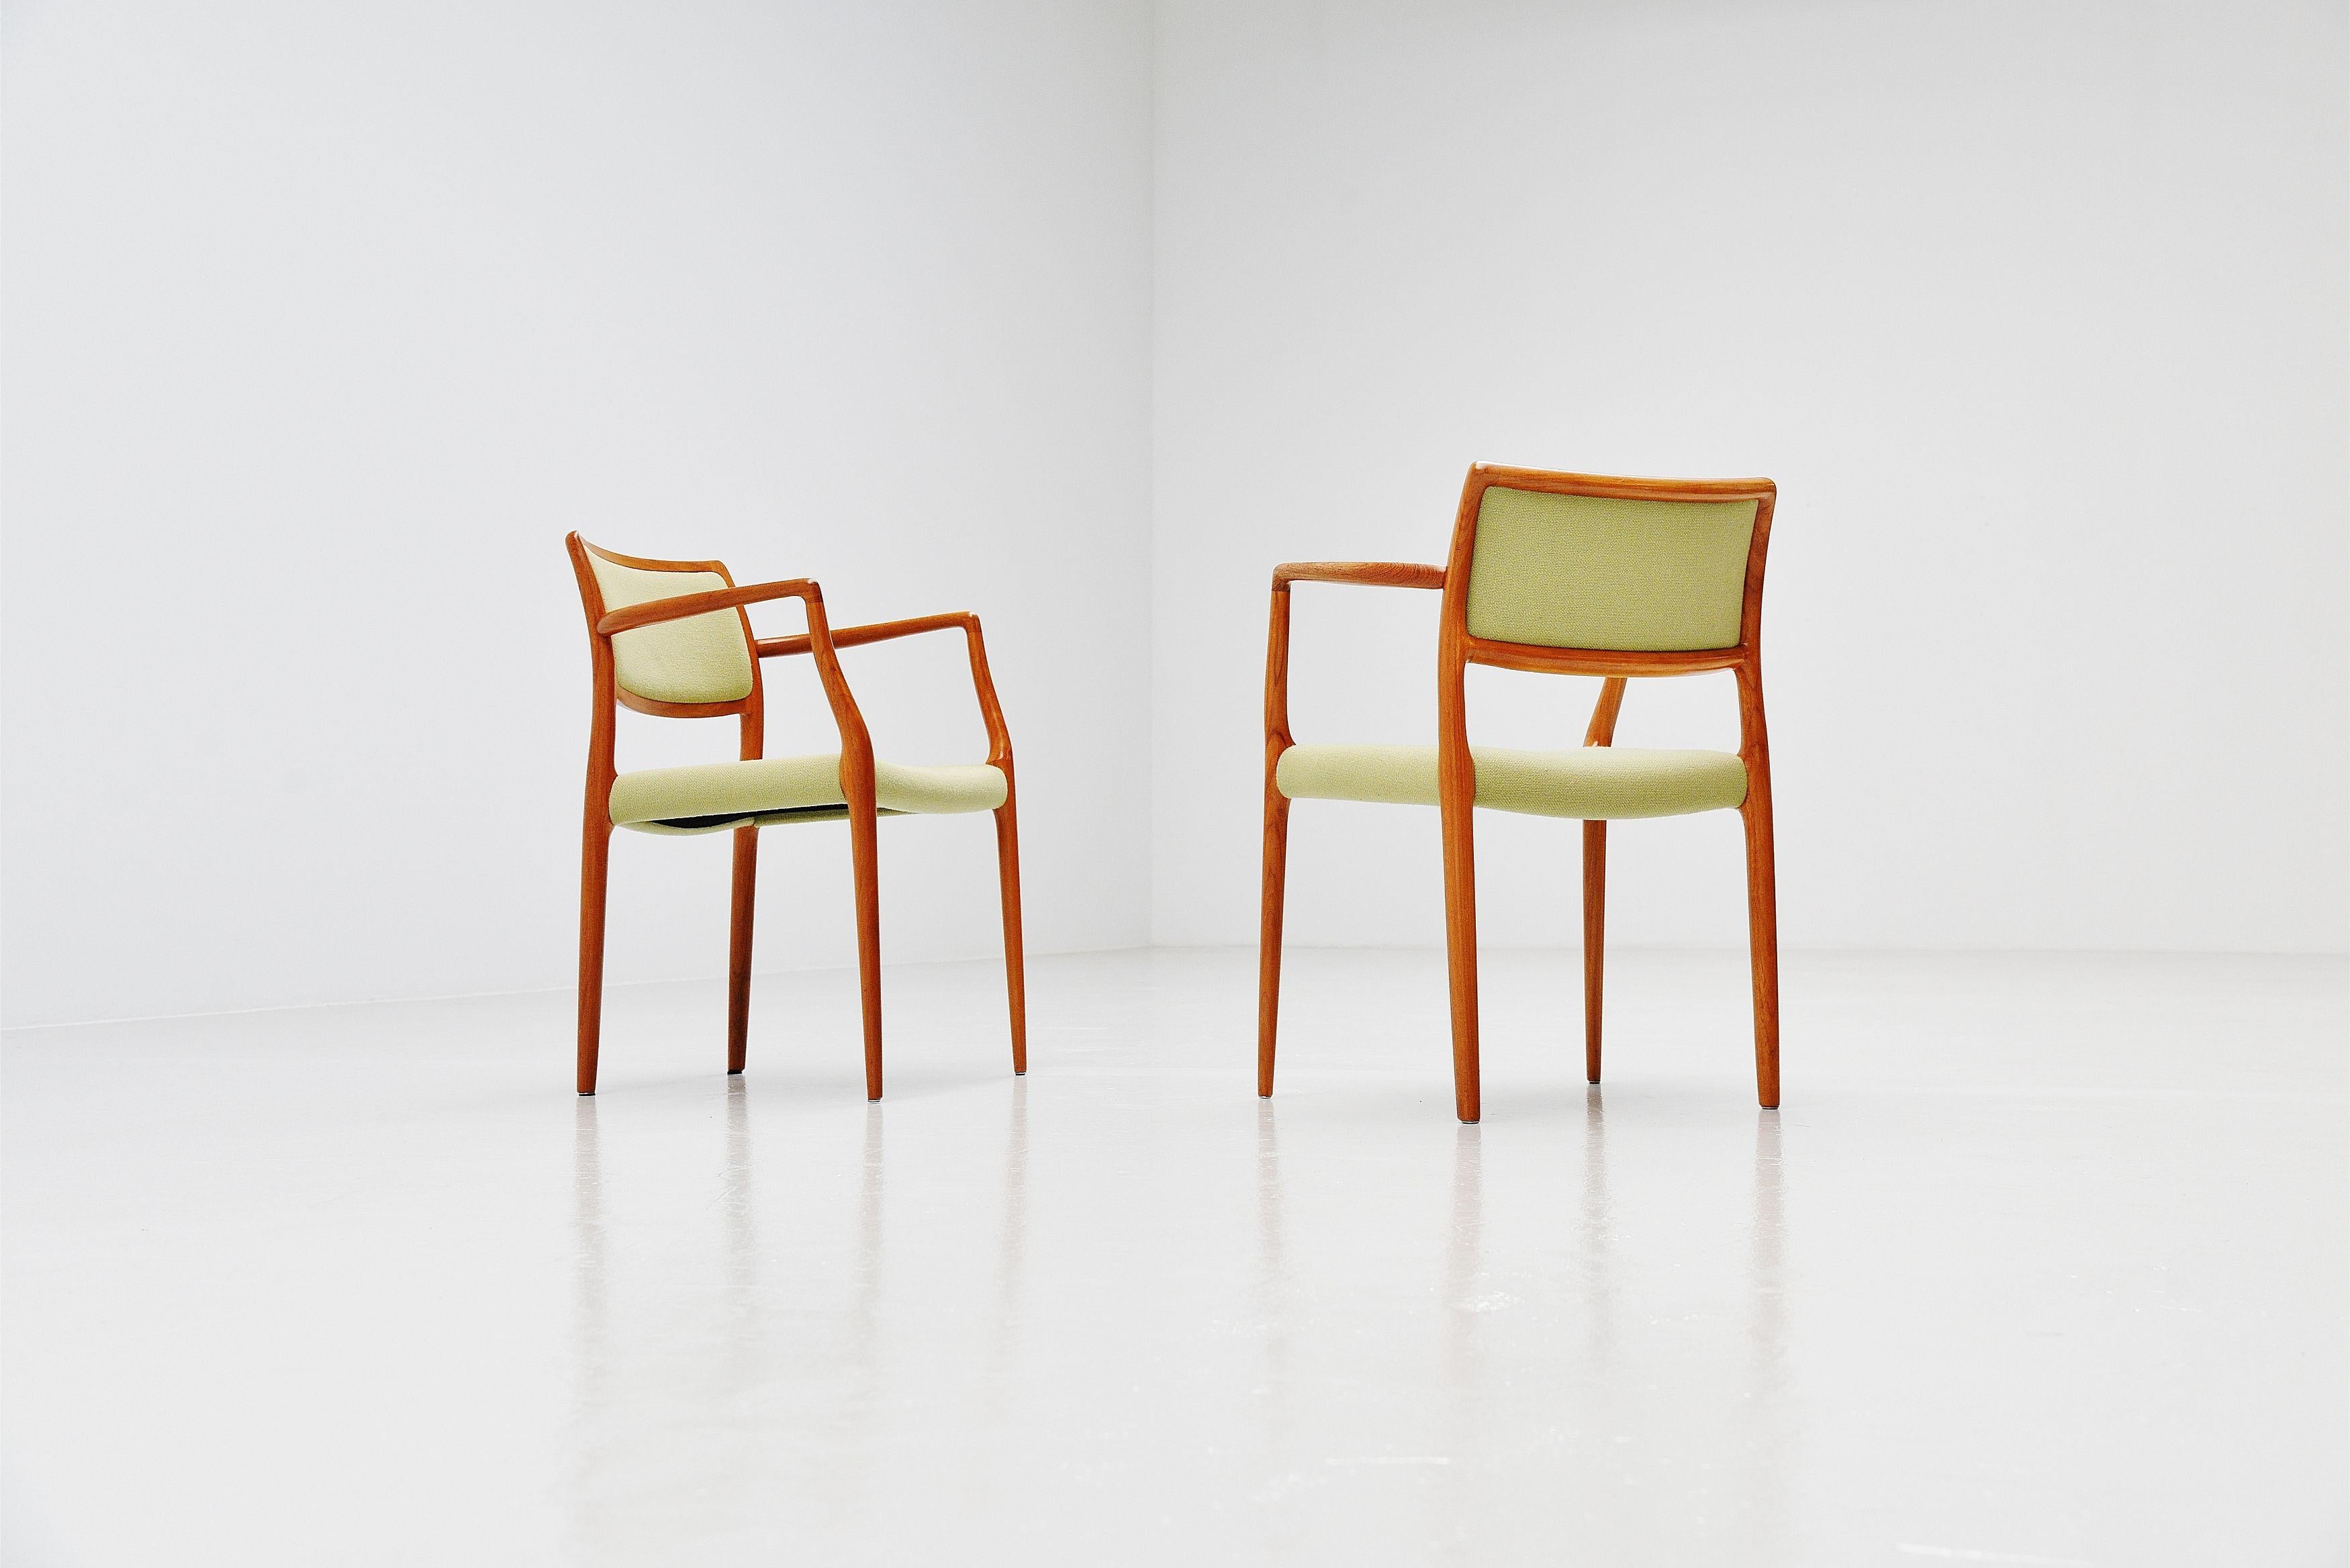 Fantastic shaped and pair of armchairs model 65 designed by Niels Moller and manufactured by J.L. Møller Mobelfabrik, Denmark 1968. These chairs have a solid teak frame and mint green upholstered seats and backs which is still original but is